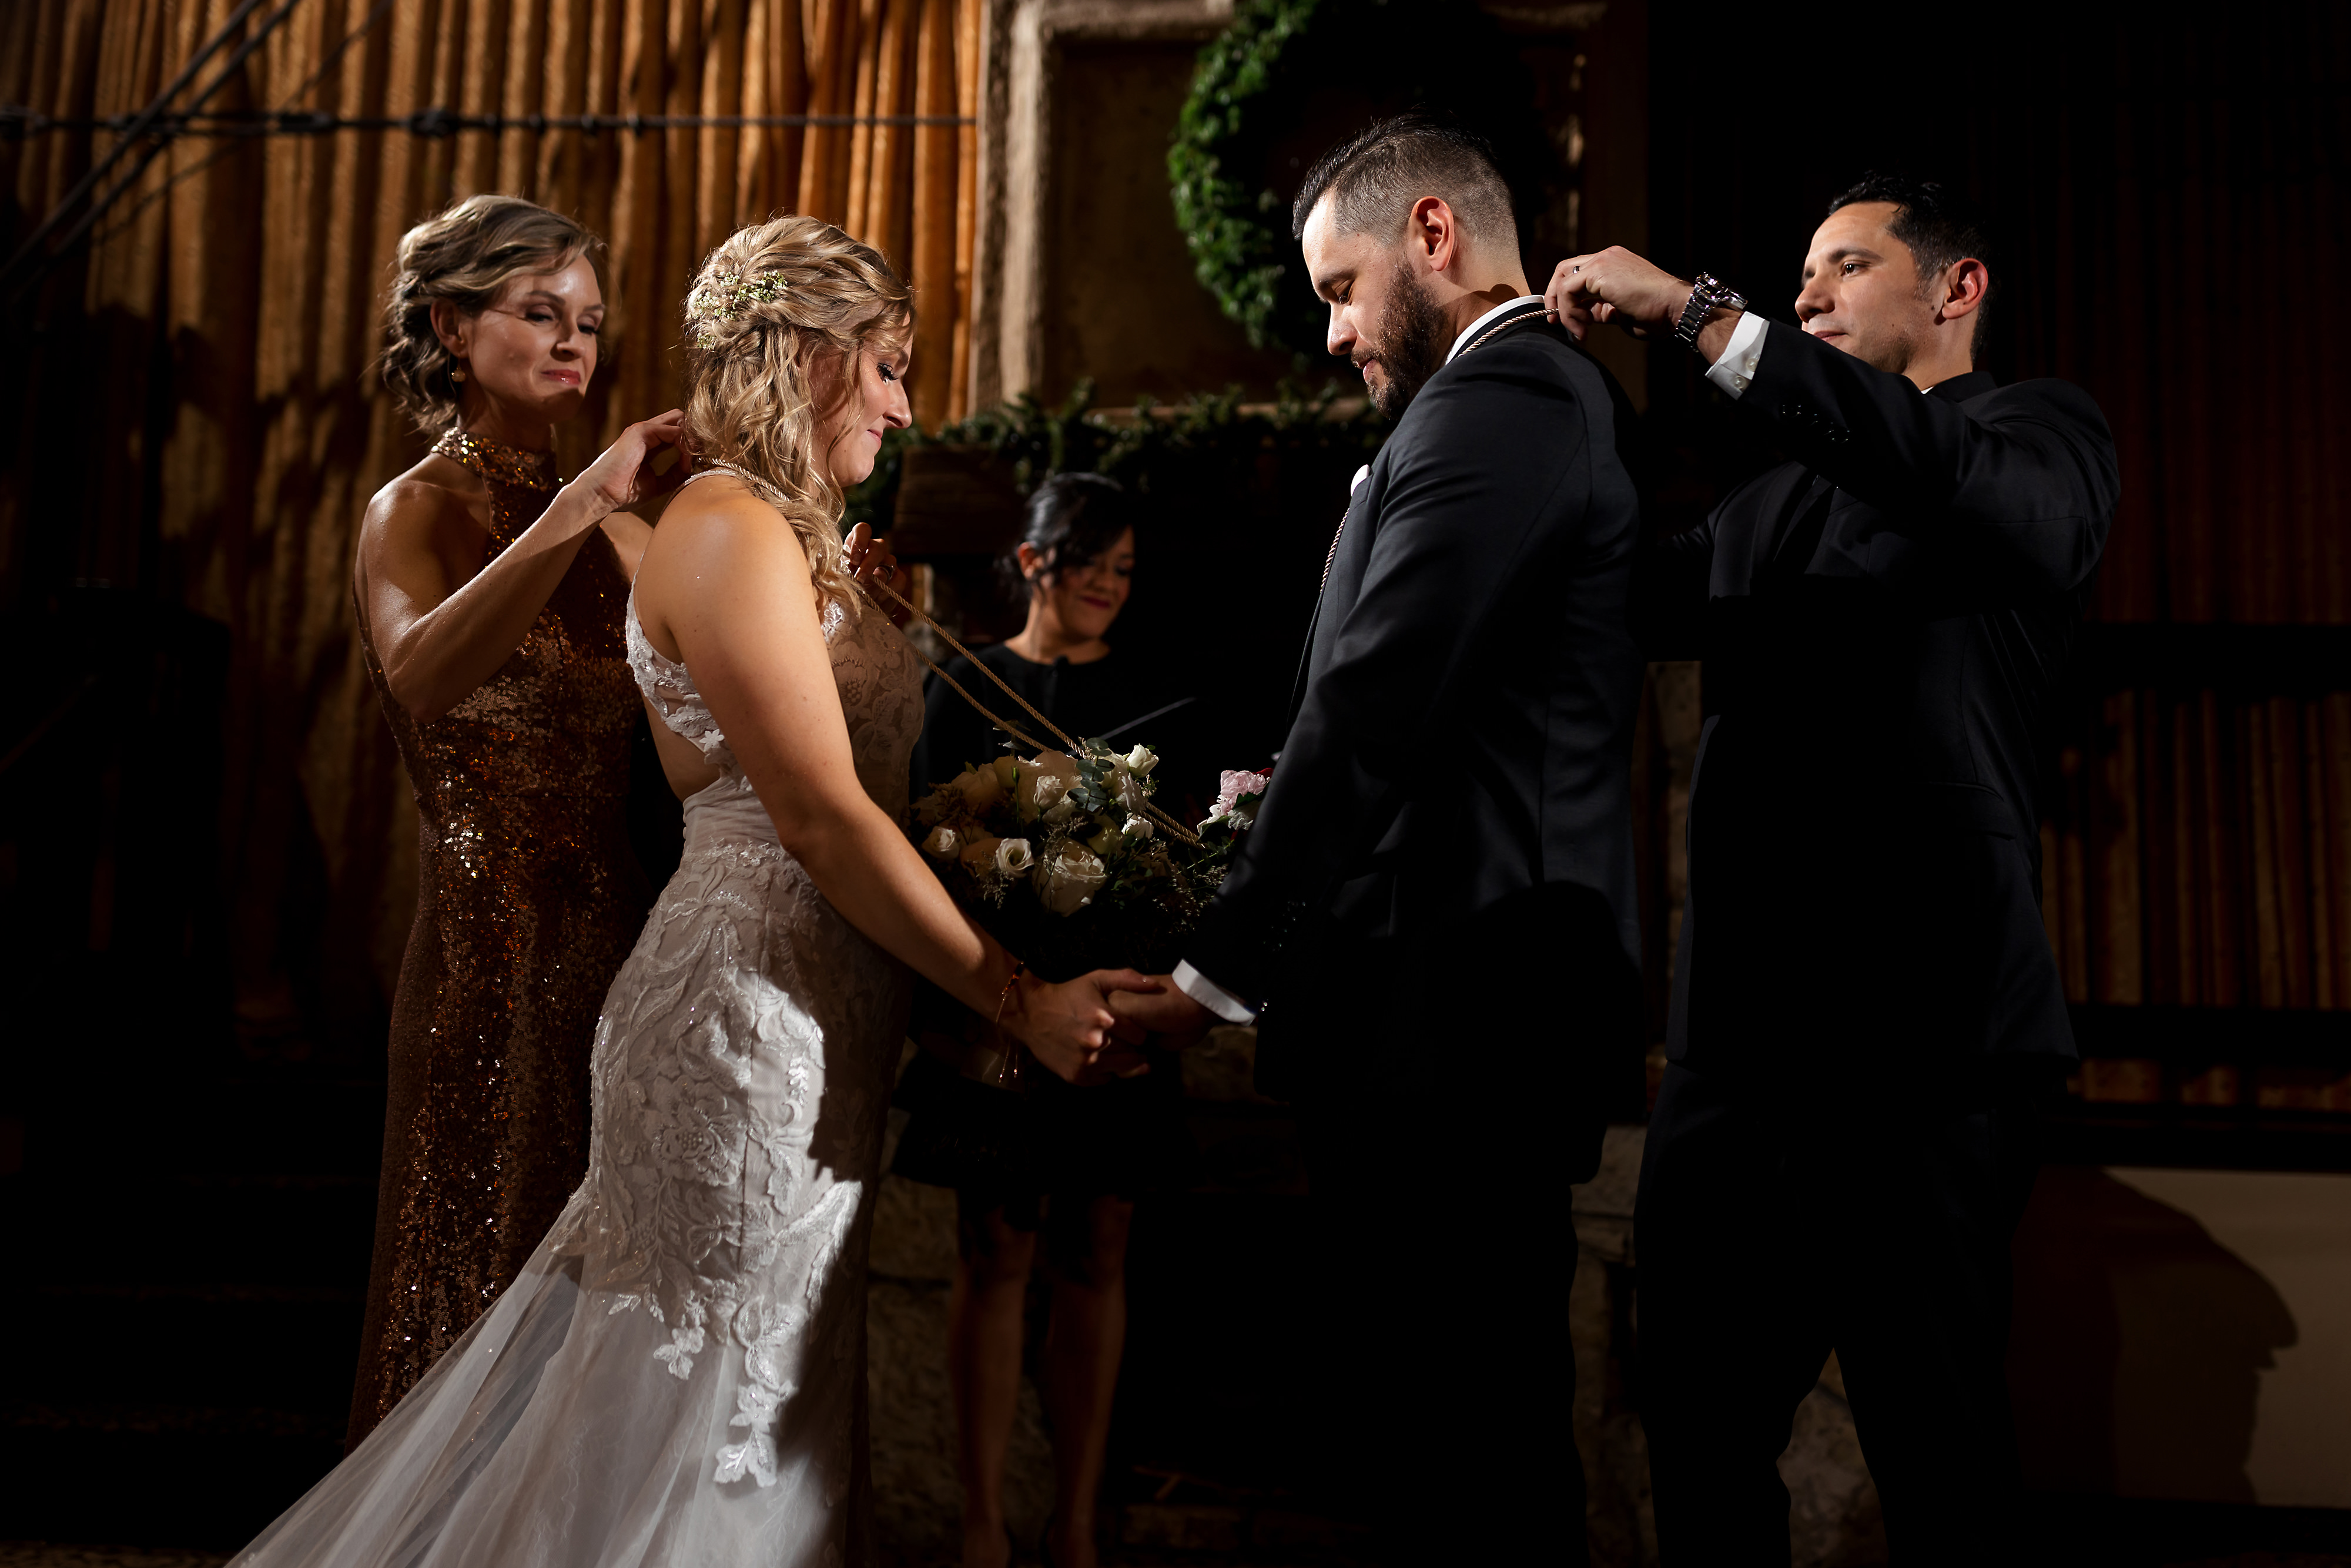 Wedding lasso exchange during wedding ceremony at Two Brothers Brewing in Aurora, Illinois